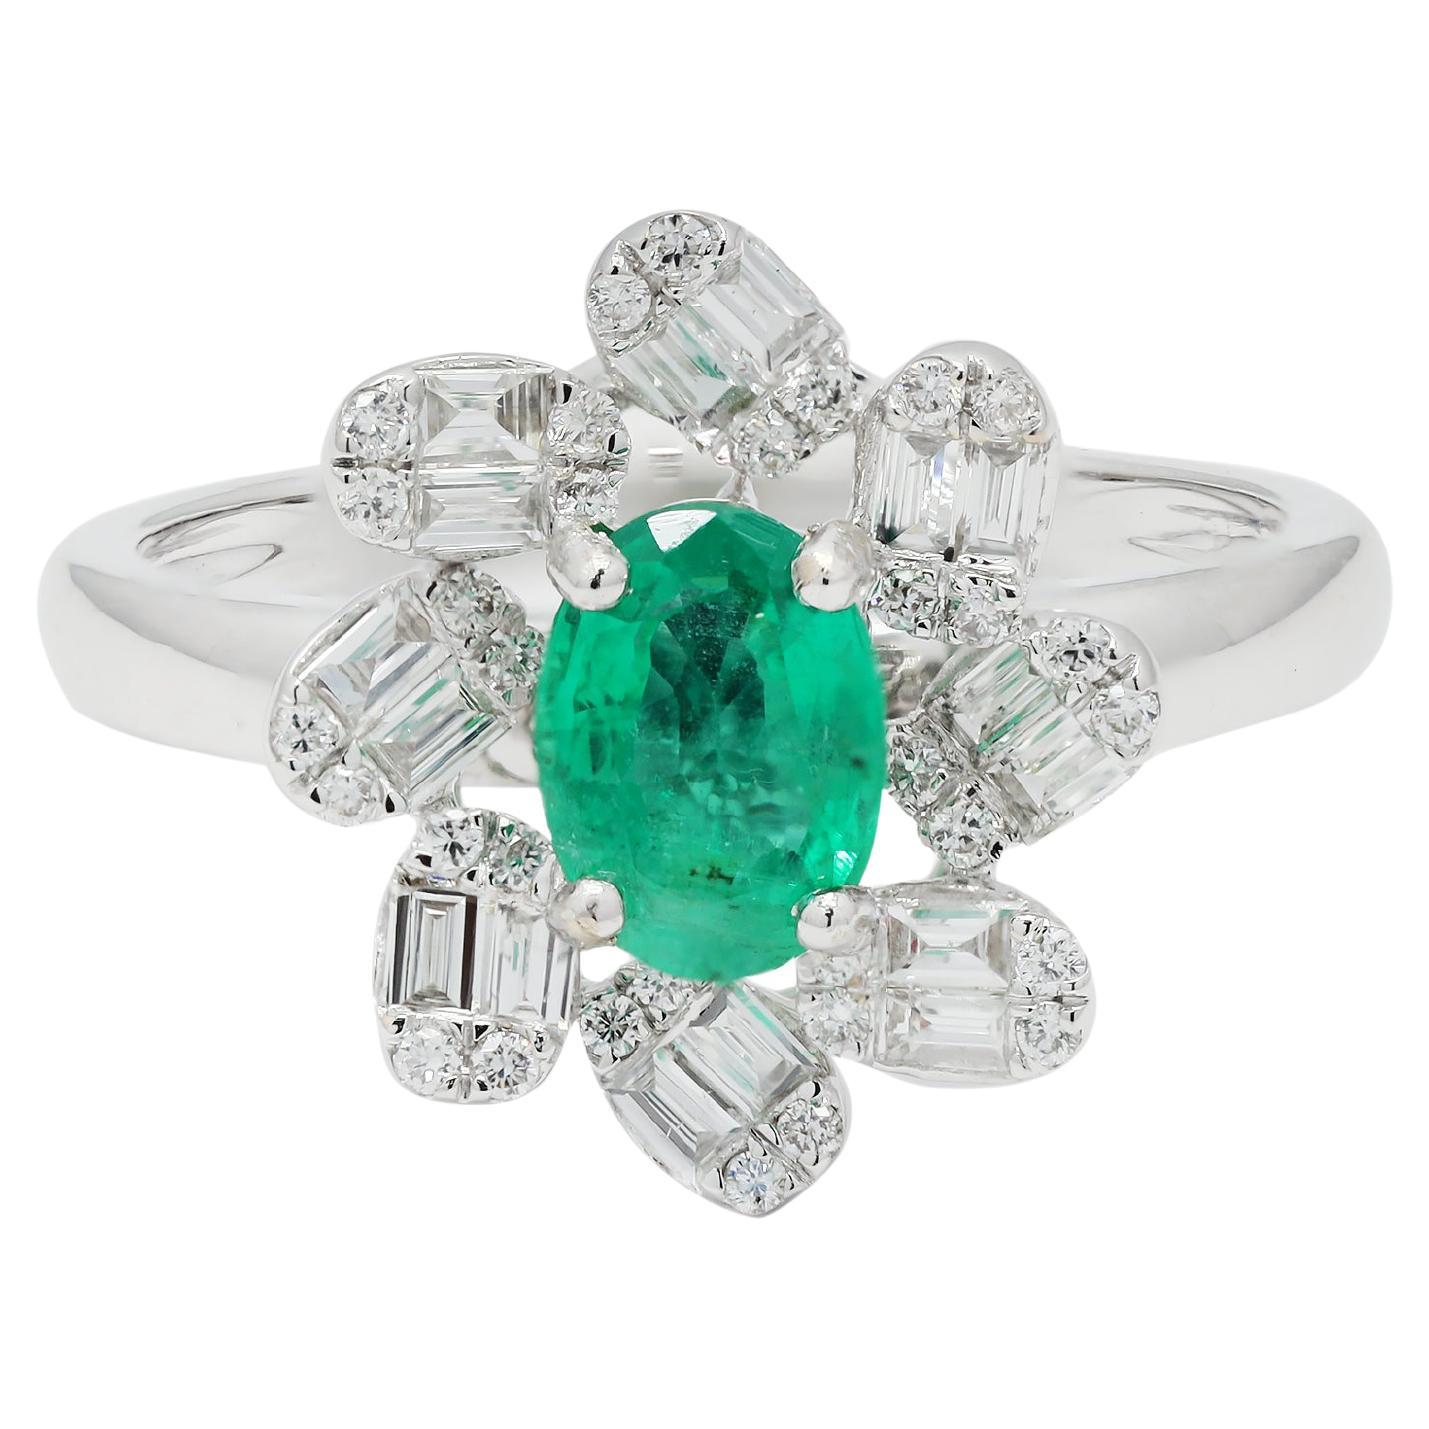 For Sale:  Designer Oval Cut Emerald and Diamond Engagement Ring in 18K Solid White Gold